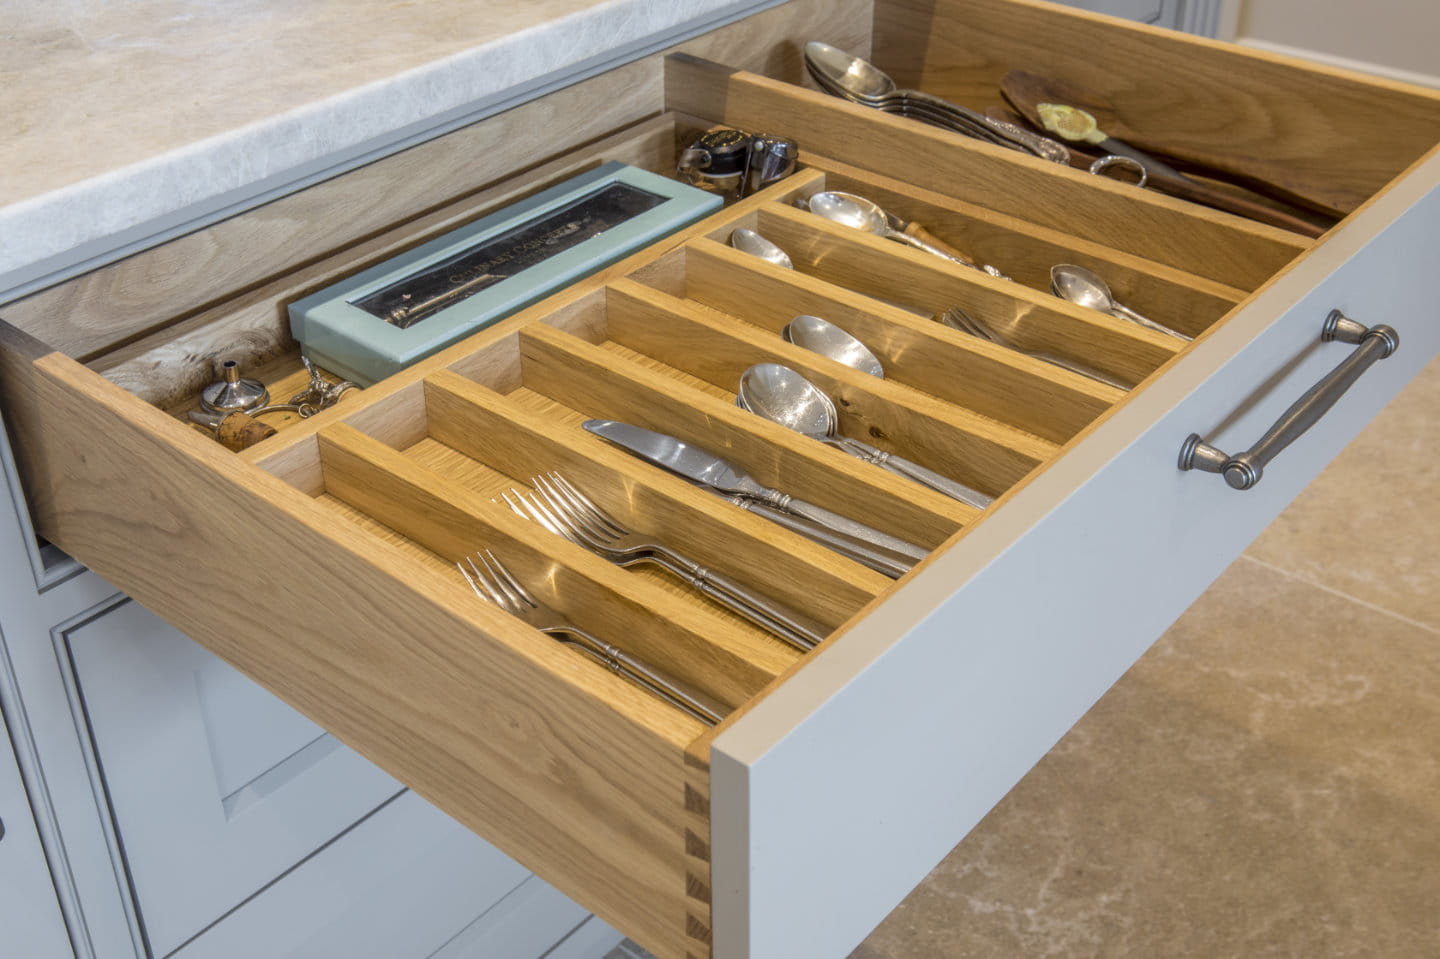 A kitchen drawer which has been opened to reveal the utensils inside.